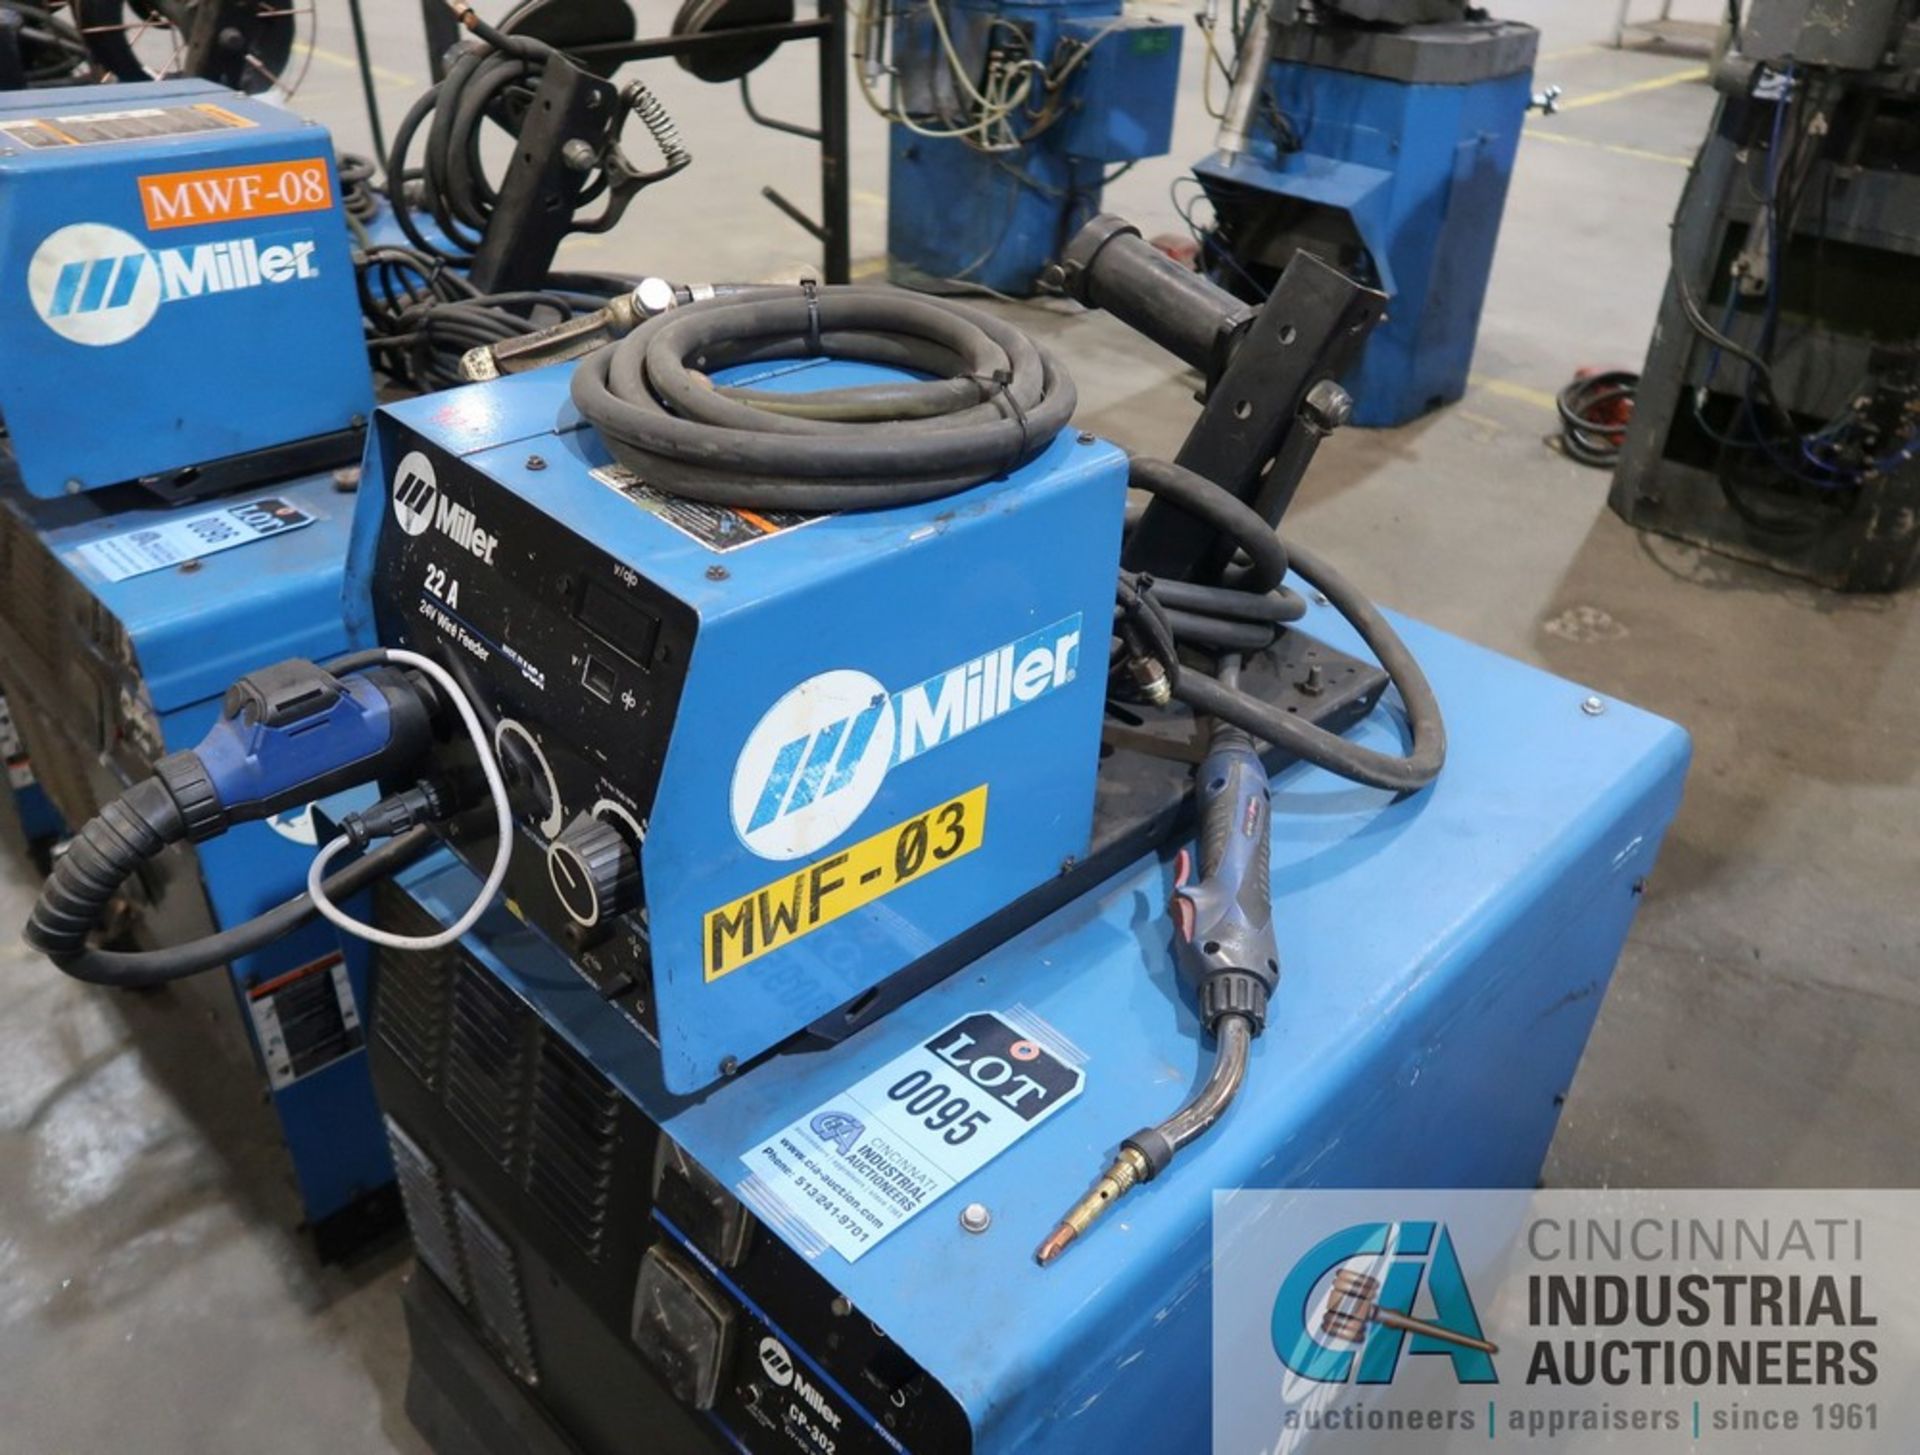 300 AMP MILLER CP-302 CV-DC WELDING POWER SOURCE; S/N LB330866, WITH MILLER 22A 24 VOLT WIRE FEEDER - Image 5 of 5